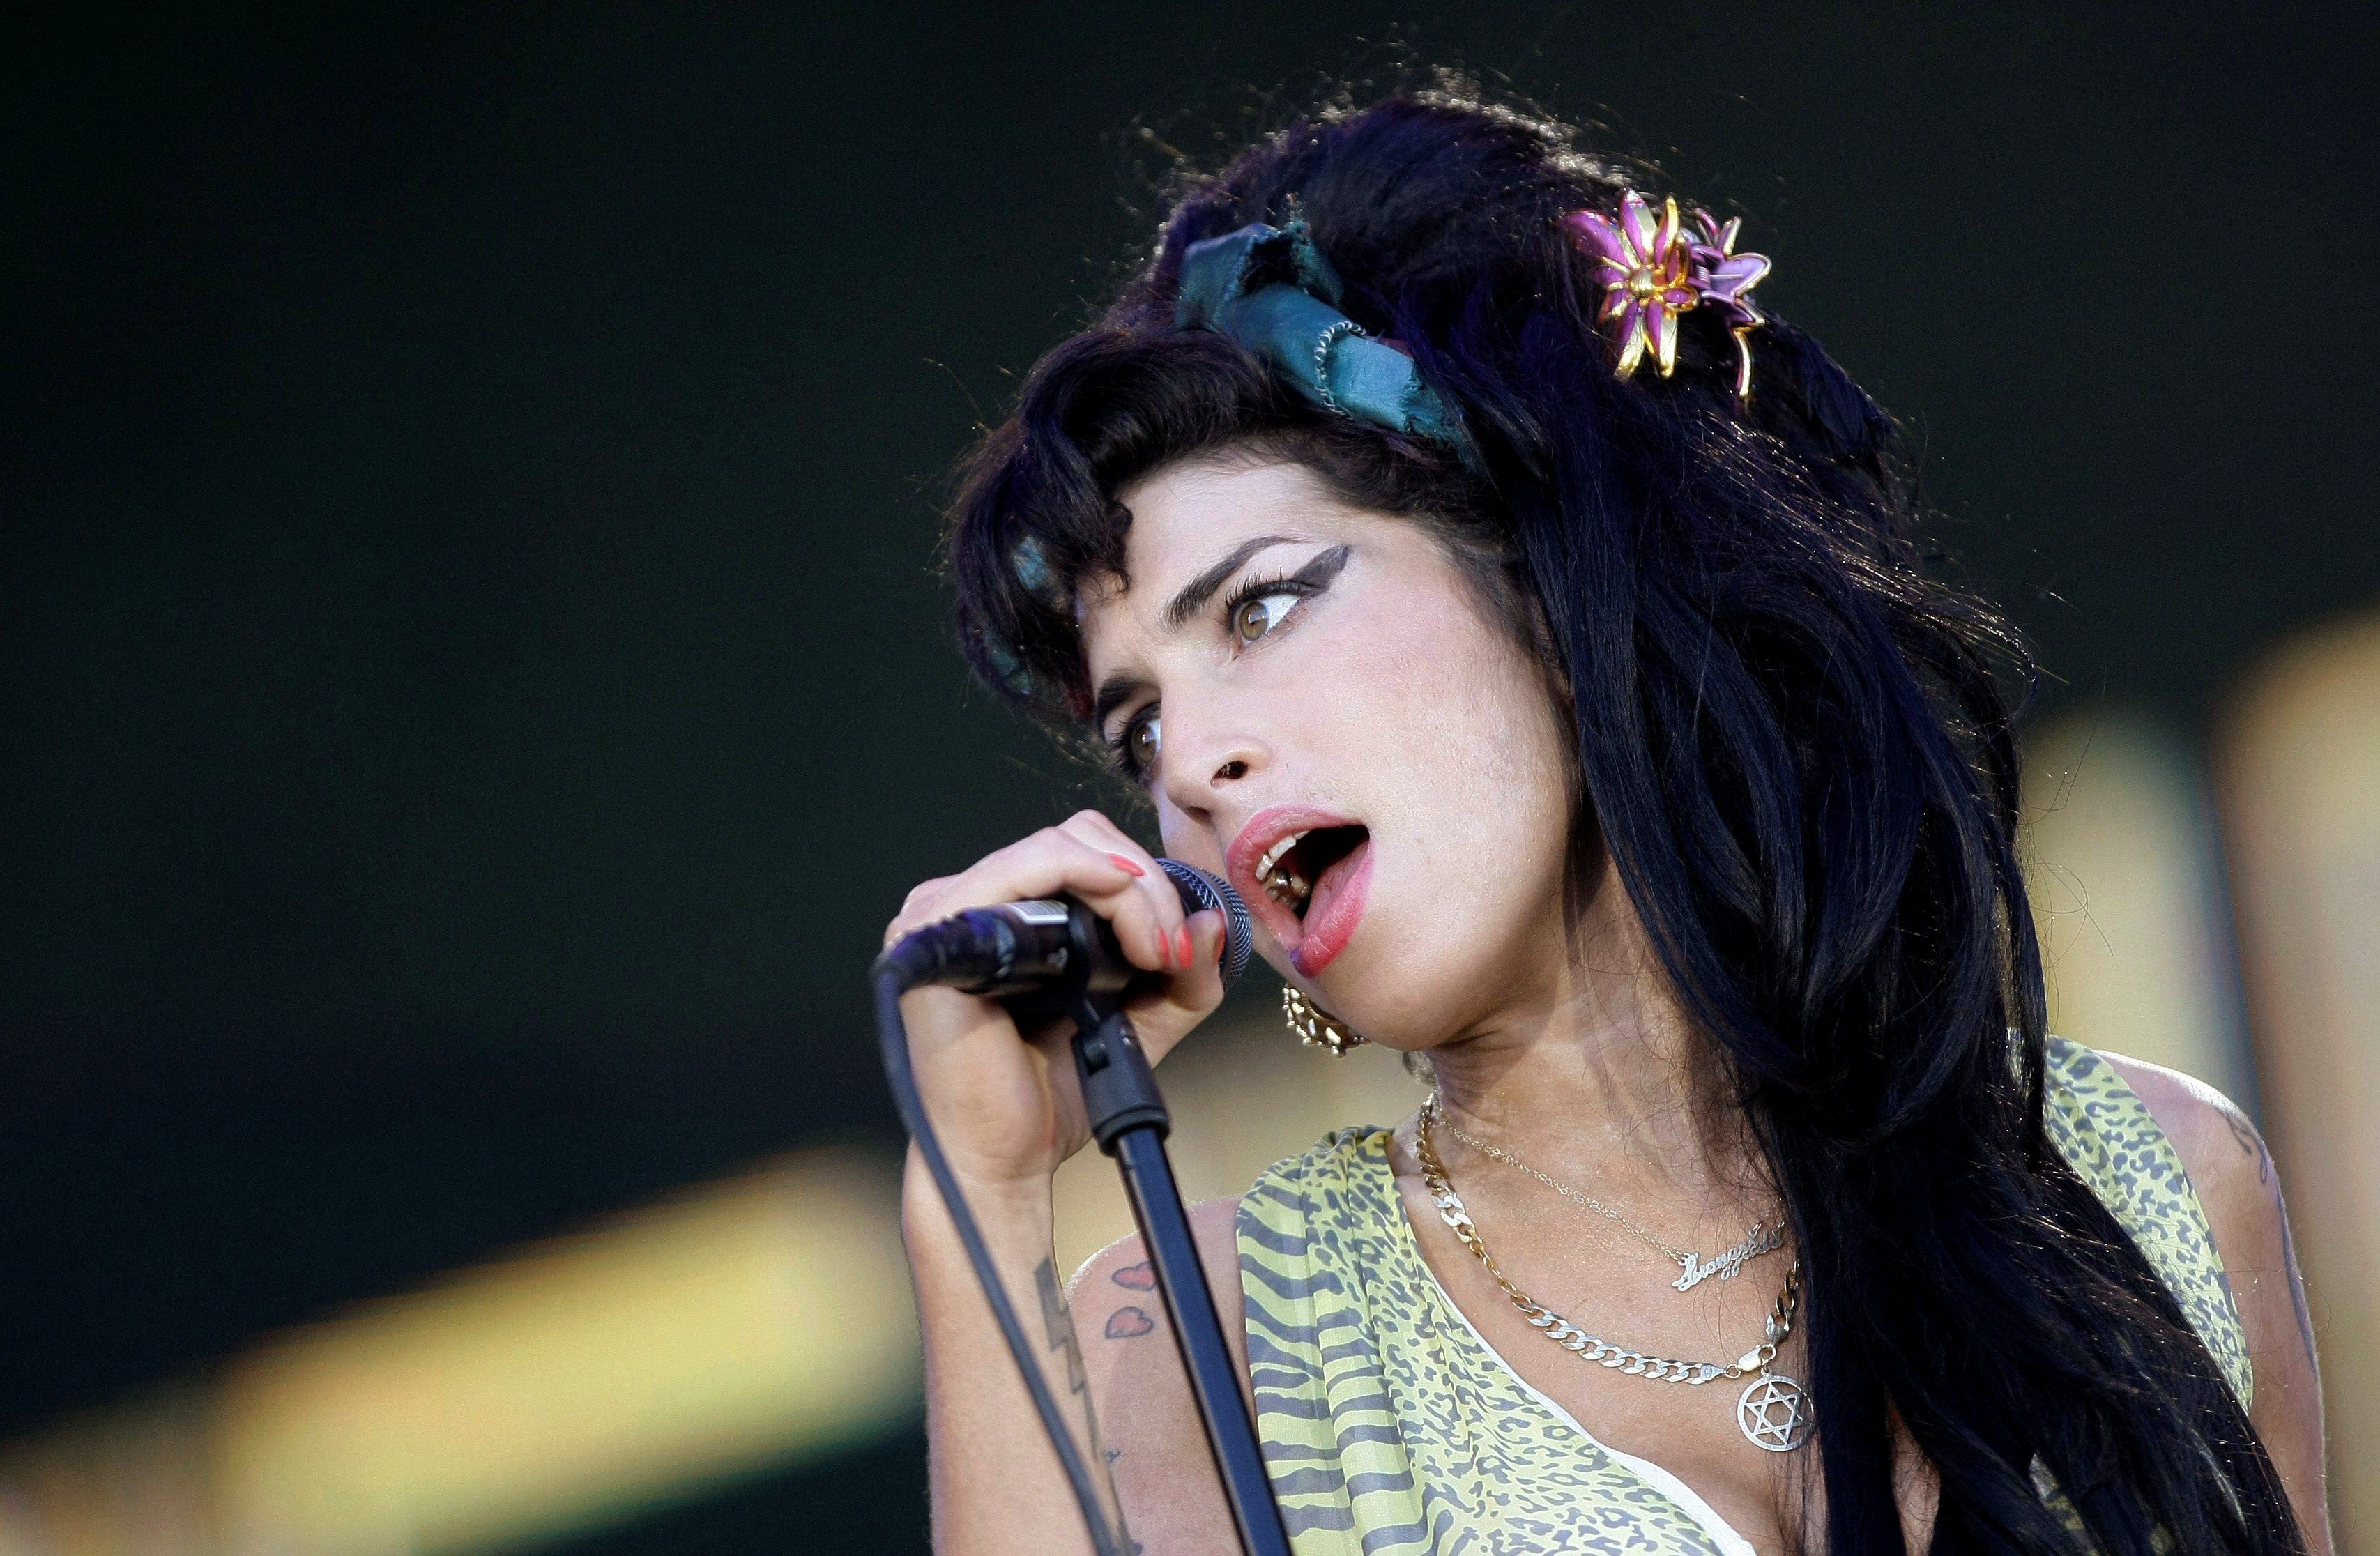 New Amy Winehouse film to mark 10 years since singer’s death